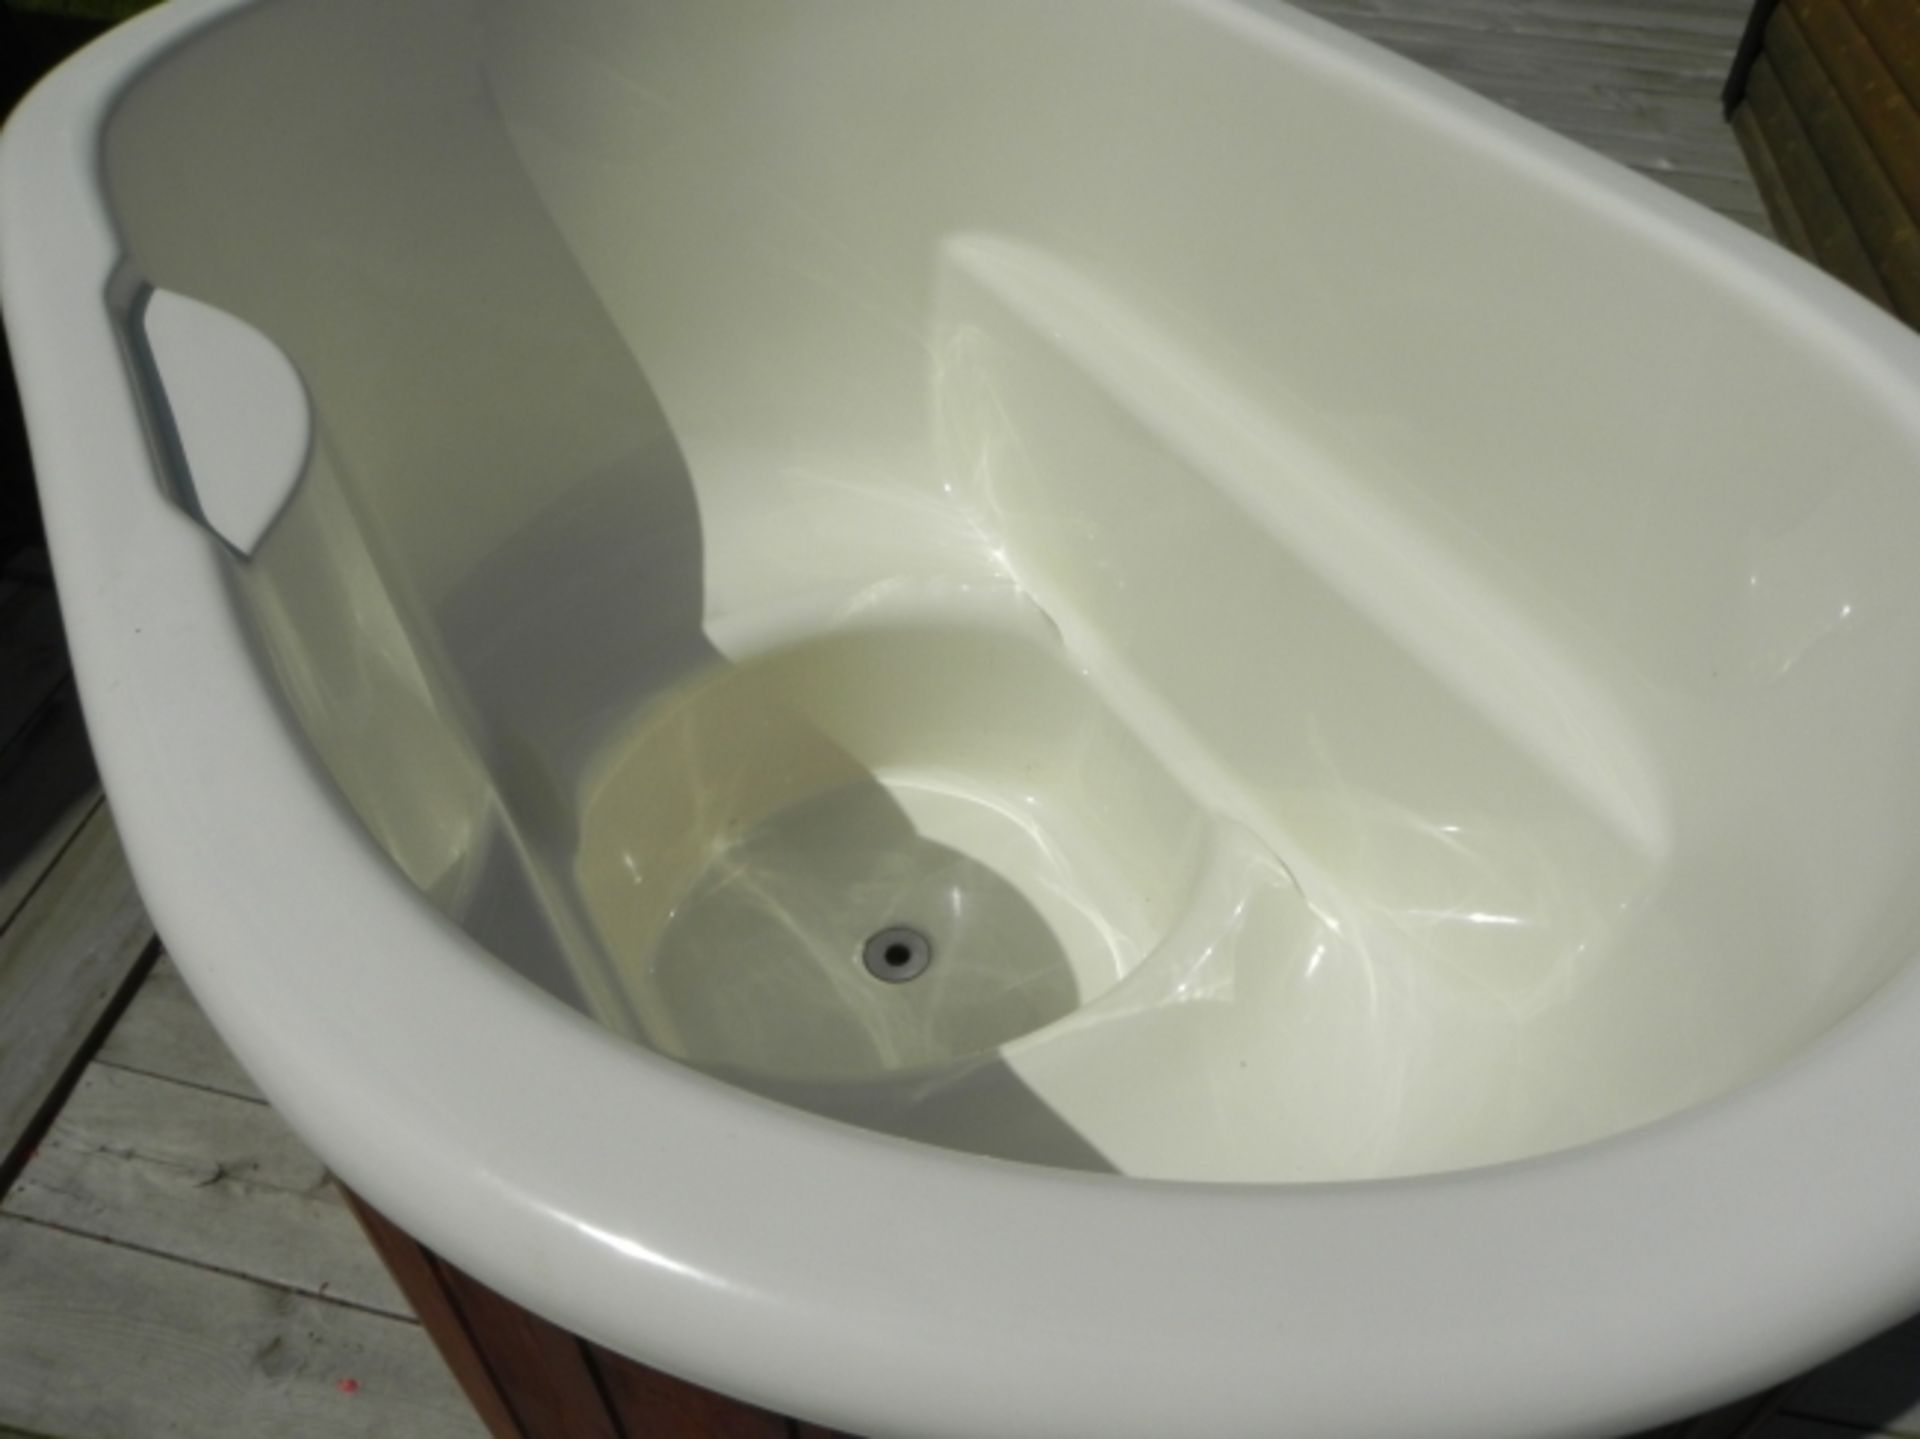 V Brand New Ofiru Hot Tub Fibre Glass Shell Hot Tub With Two Internal Benches - Fully Assembled 1. - Image 2 of 2